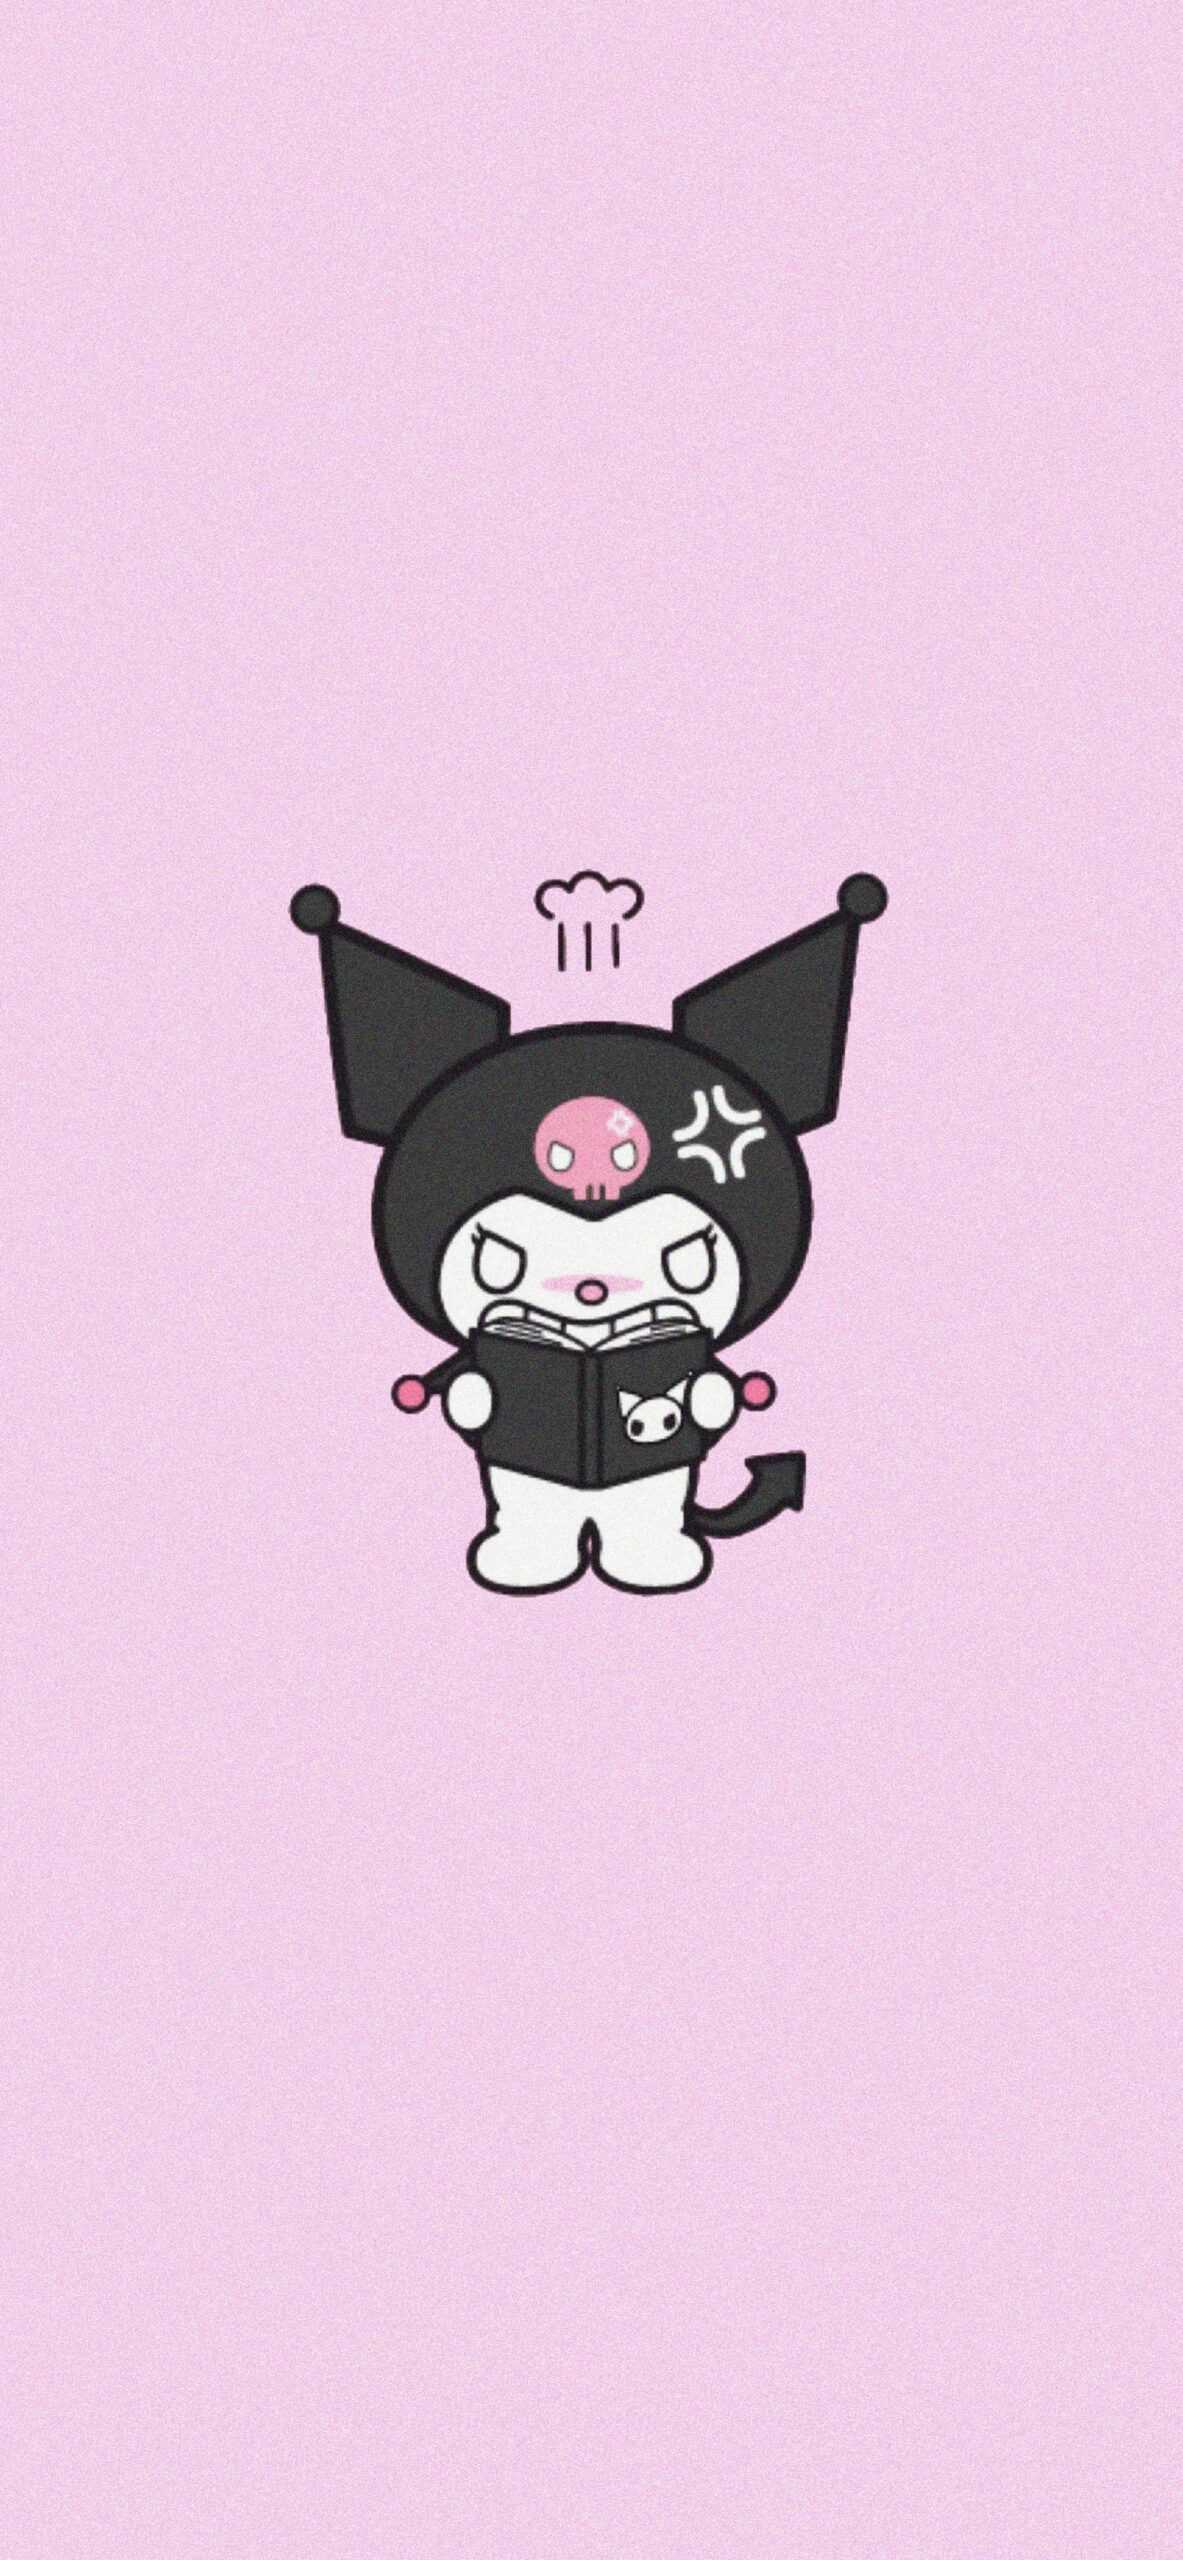 A cartoon character with black and white clothing - Kuromi